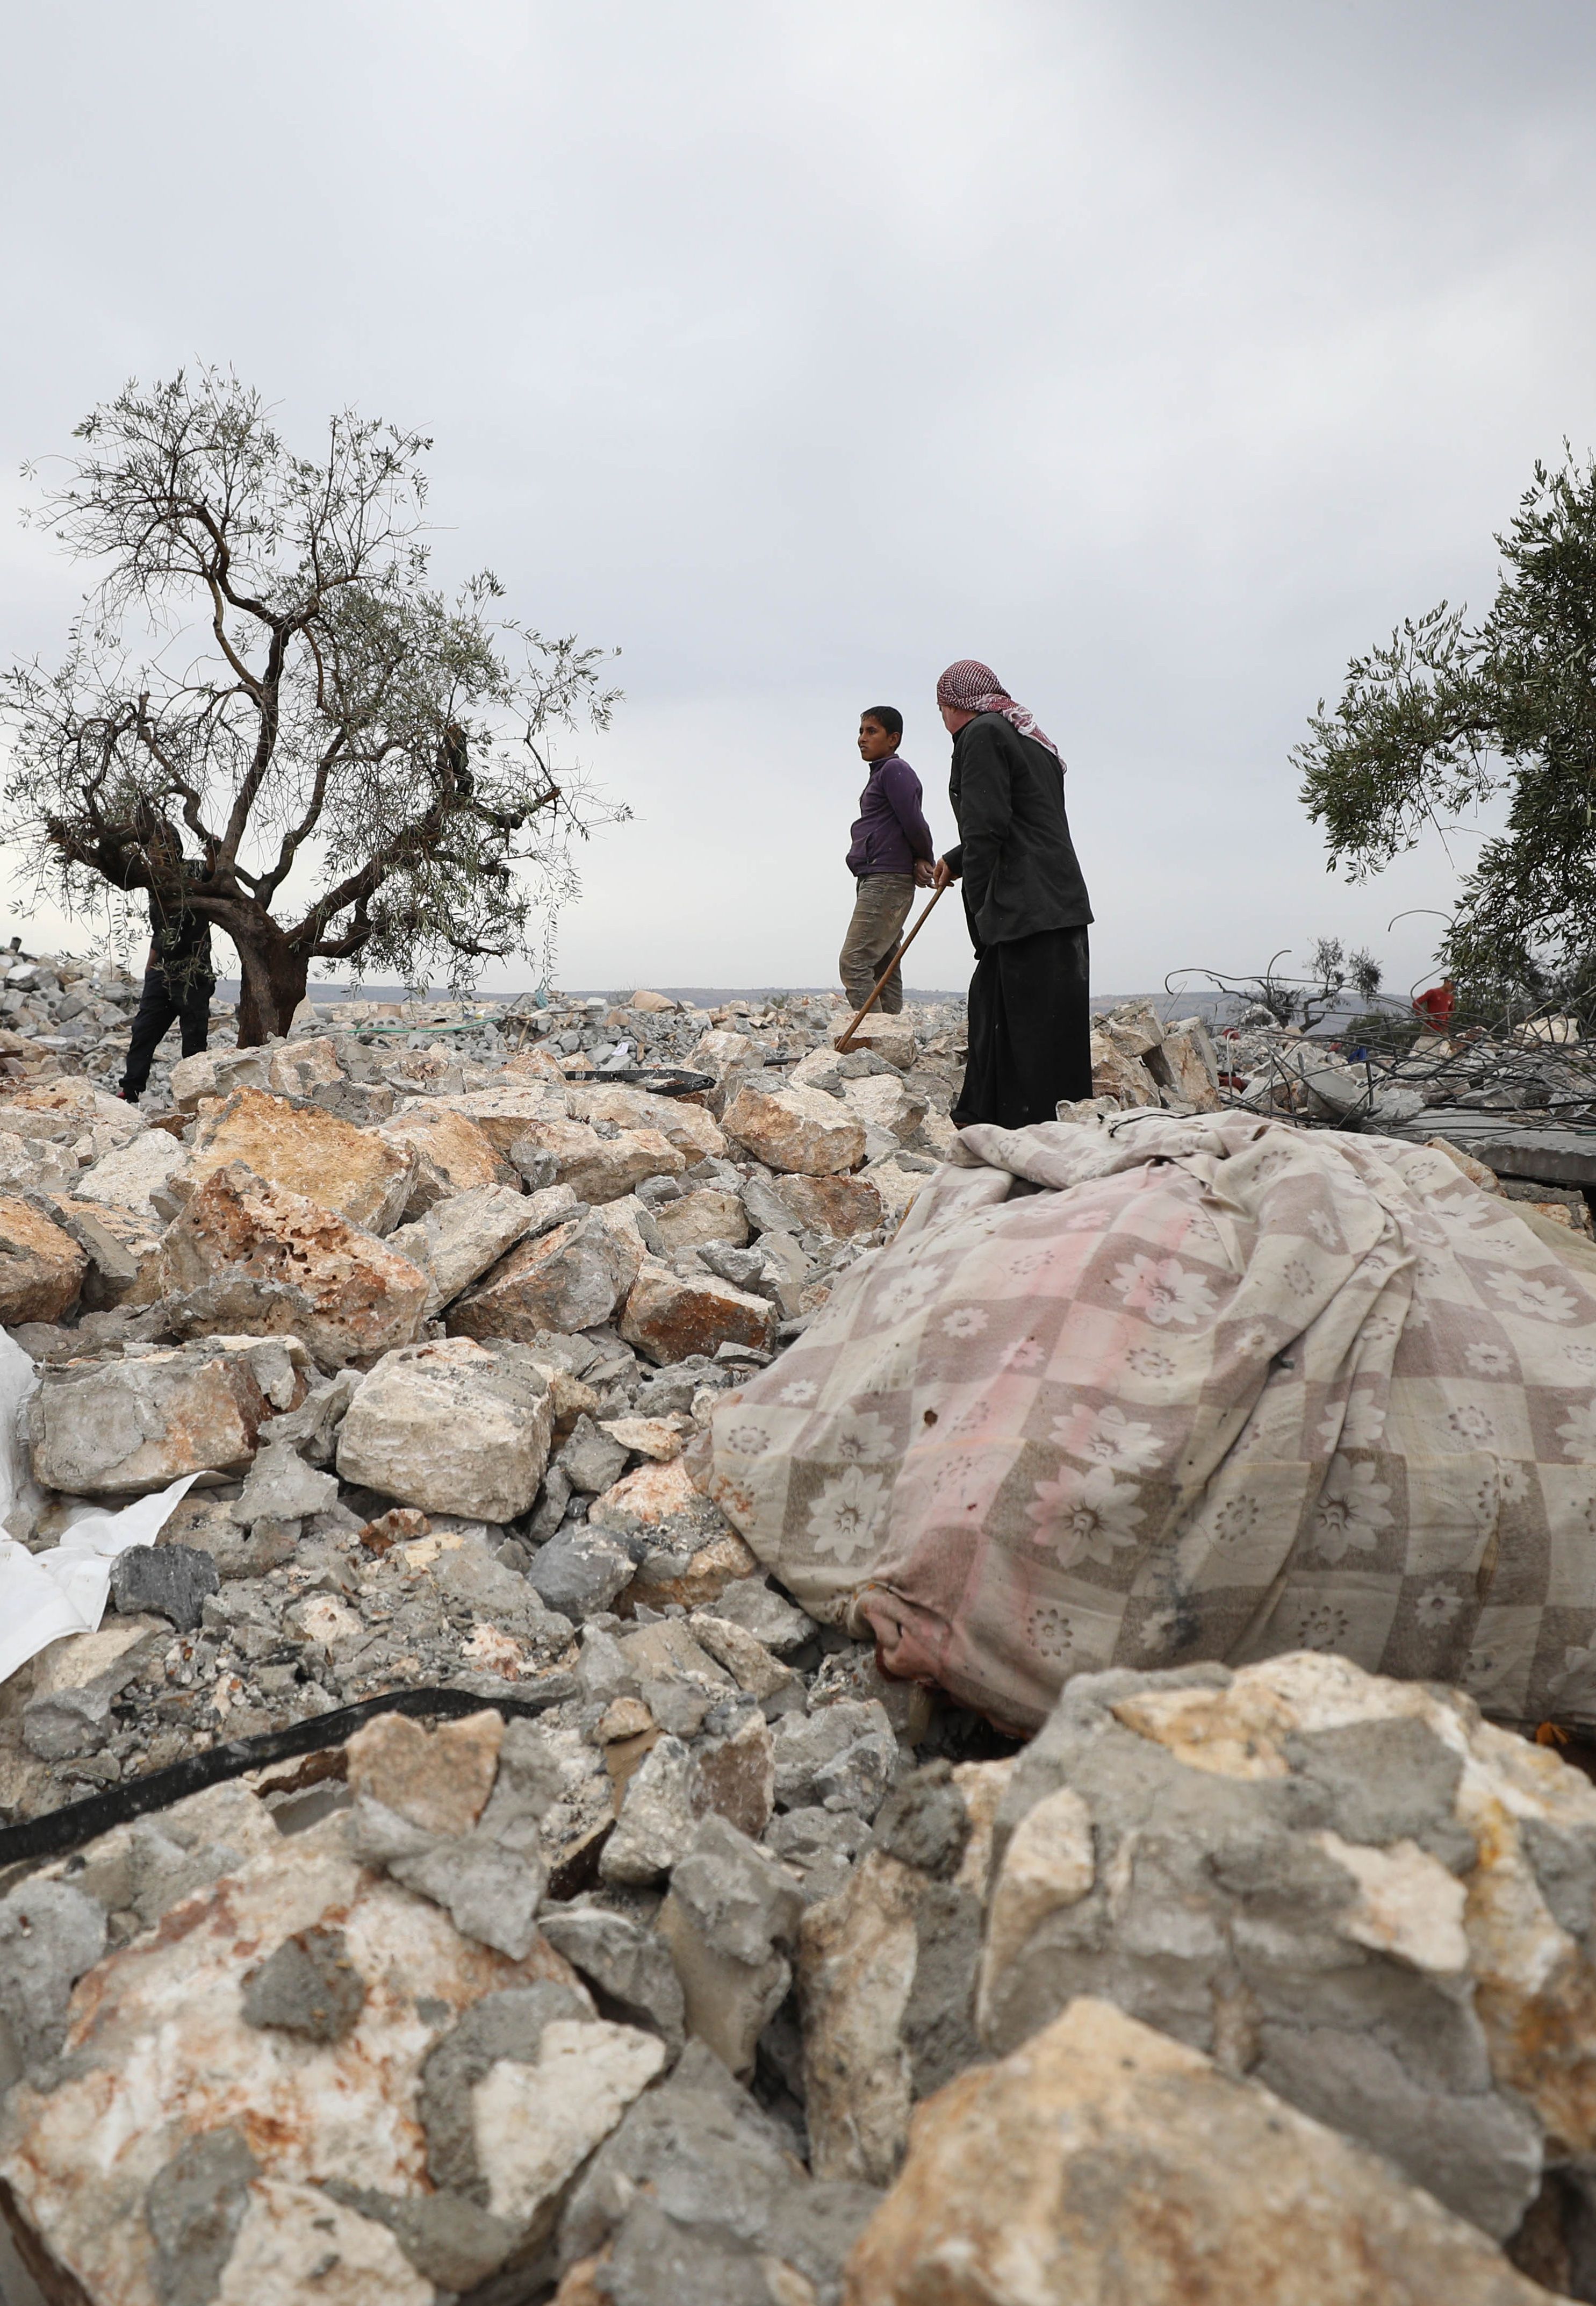 A picture taken on October 28, 2019 shows Syrians sifting through the rubble at the site of a suspected US-led operation against Islamic State (IS) chief Abu Bakr al-Baghdadi the previous day, on the edge of the small Syrian village of Barisha in the country's opposition-held northwestern Idlib province. - US President Donald Trump announced that Baghdadi, the elusive leader of the jihadist group and the world's most wanted man, was killed in the early hours of Octobe 27 in an overnight US raid near the village, located less than five kilometres from Turkey and controlled by the dominant jihadist group Hayat Tahrir al-Sham, an organisation that includes former operatives from Al-Qaeda's Syria affiliate. (Photo by Omar HAJ KADOUR / AFP) (Photo by OMAR HAJ KADOUR/AFP via Getty Images)